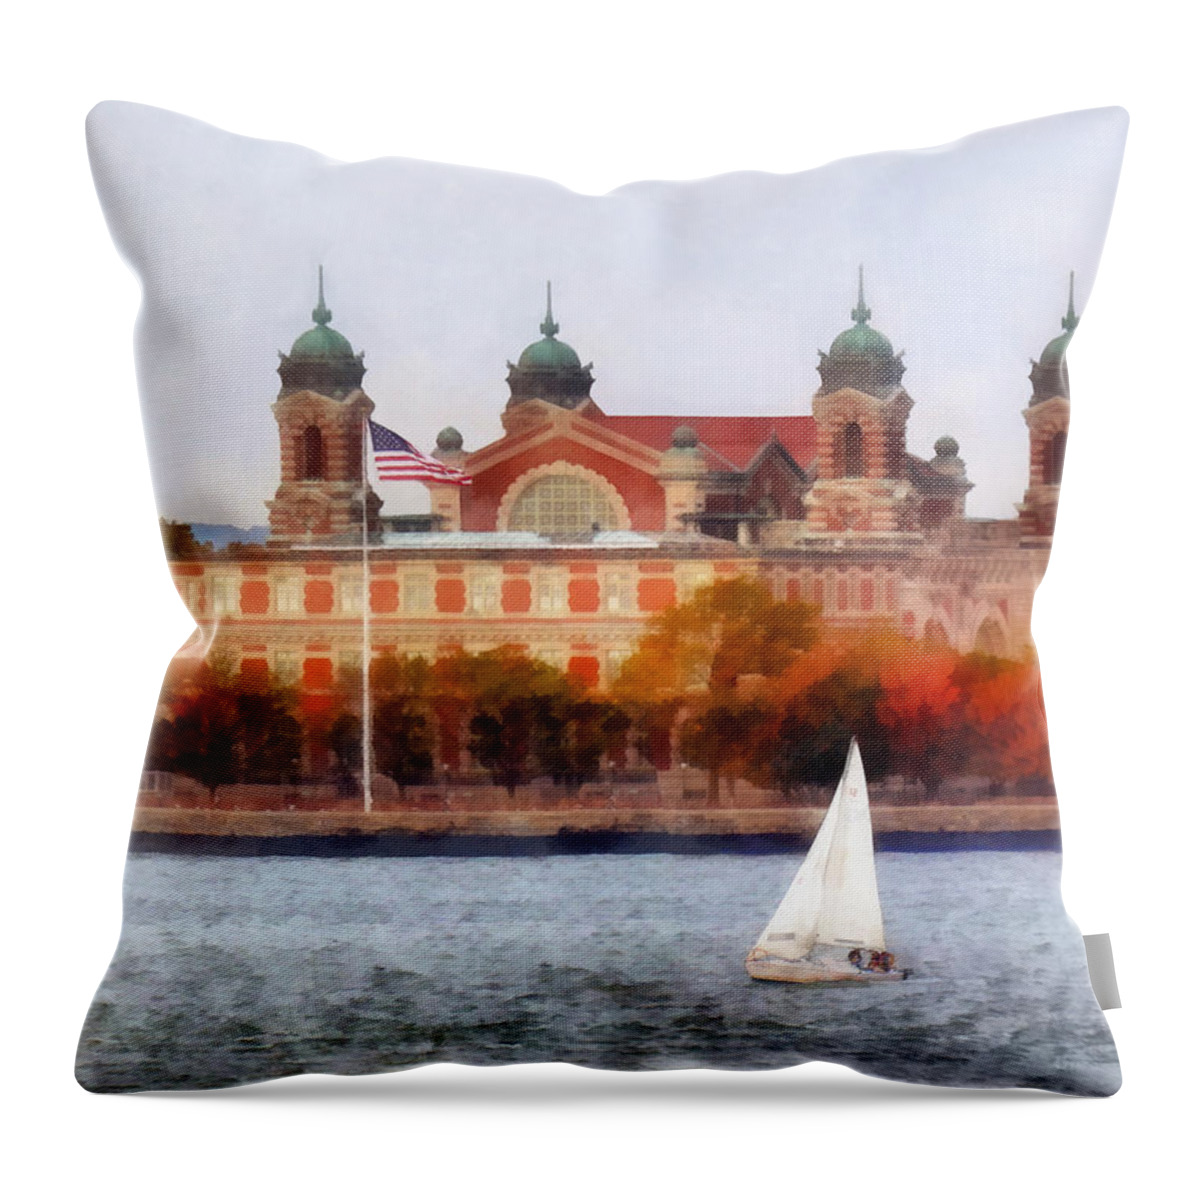 Ellis Island Throw Pillow featuring the photograph Sailboat by Ellis Island by Susan Savad